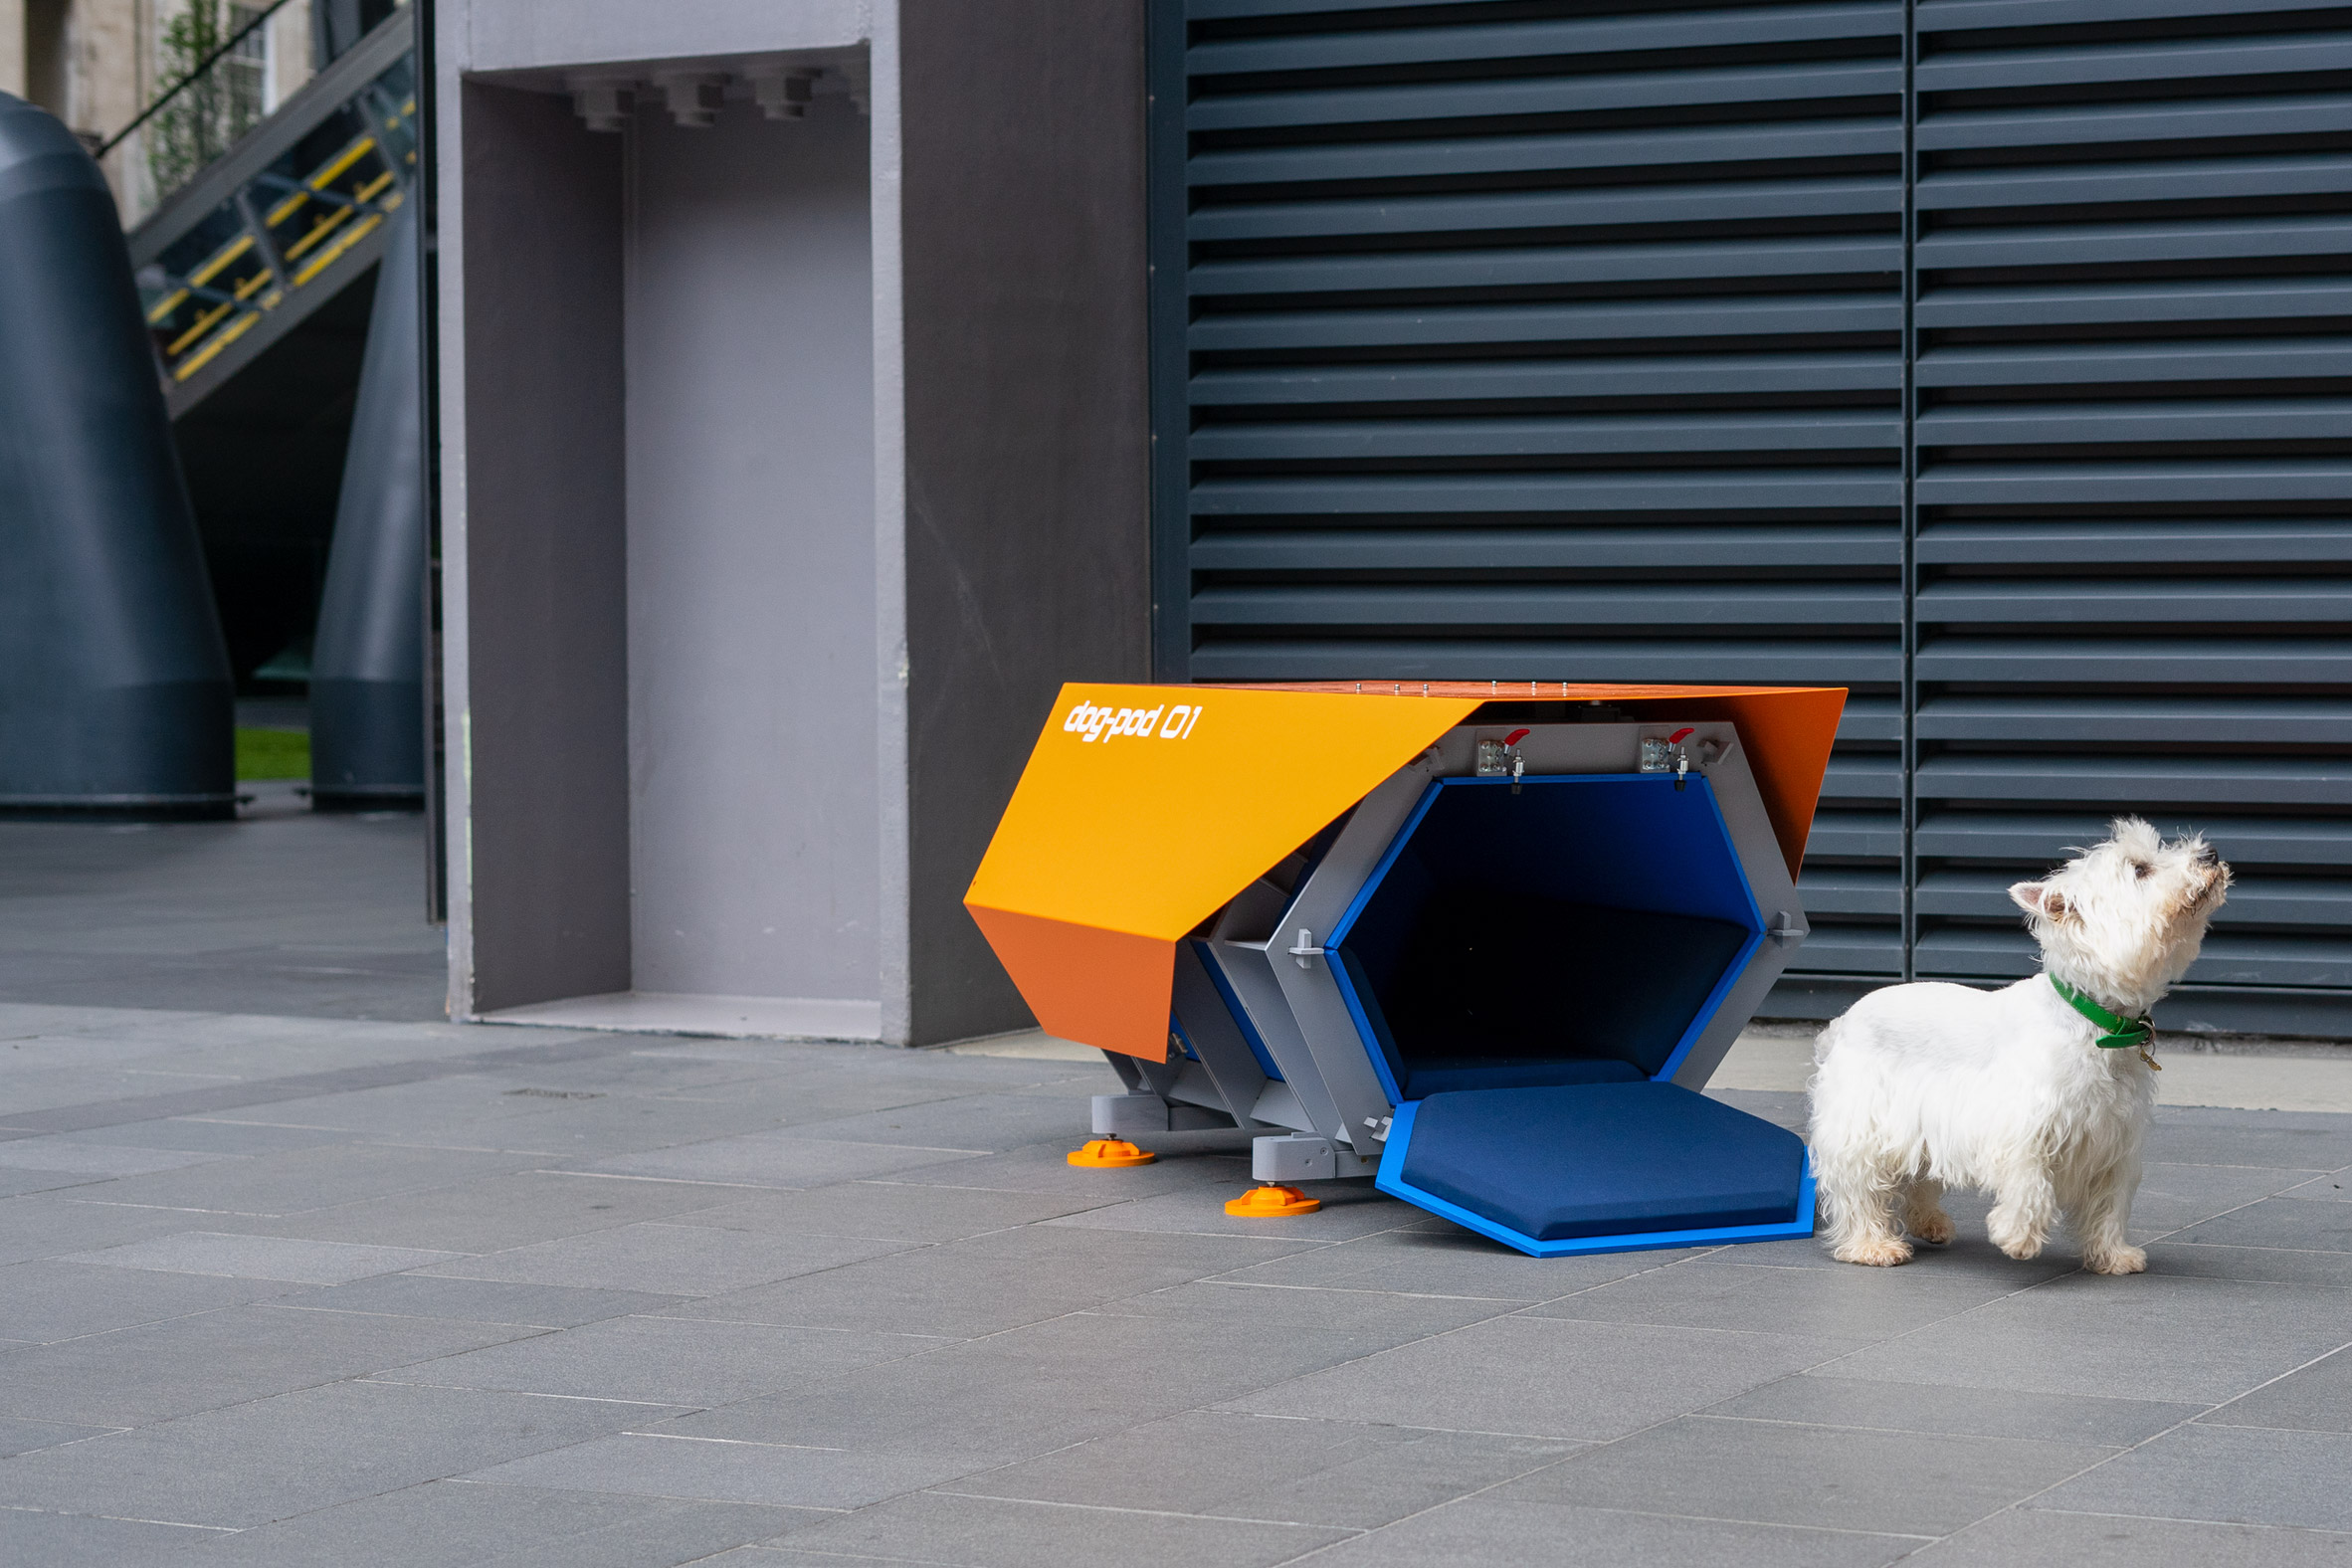 A dog is pictured beside the blue and orange dog kennel